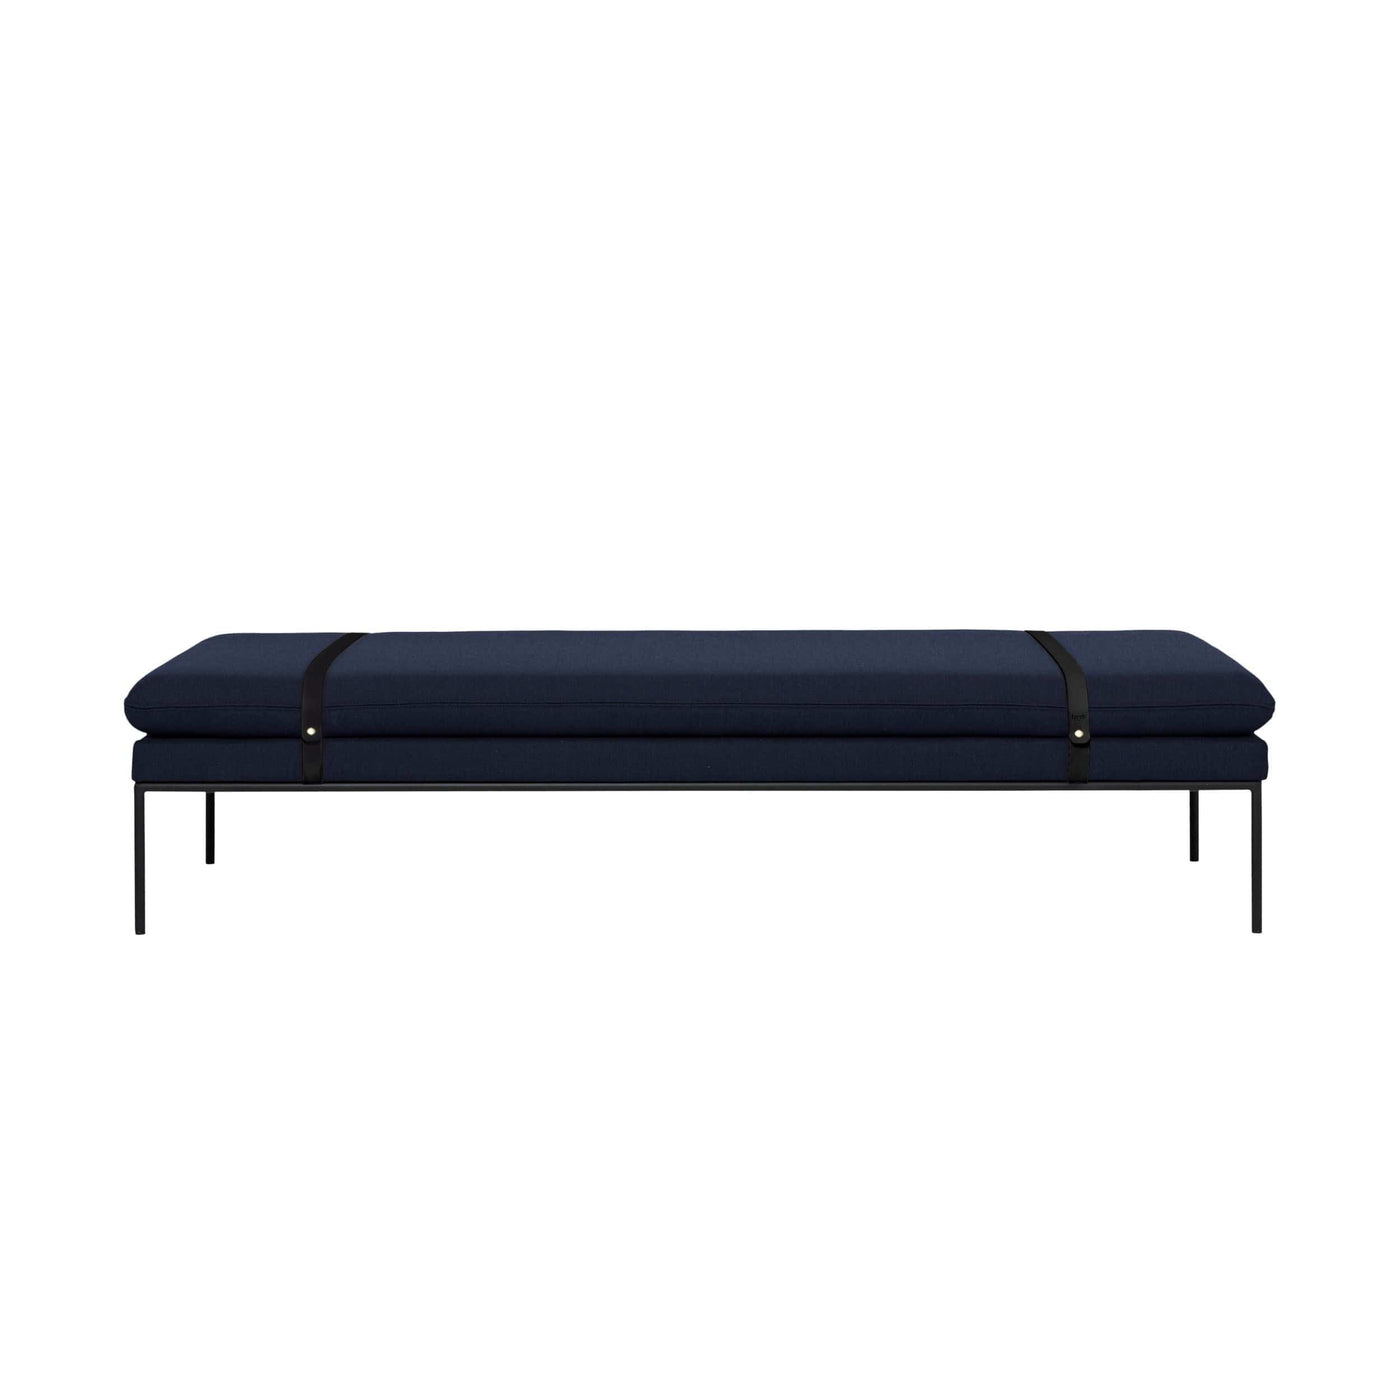 Ferm Living Turn Daybed in Fiord by Kvadrat dark blue fabric and black leather straps. Made to order from someday designs. #colour_dark-blue-fiord-by-kvadrat